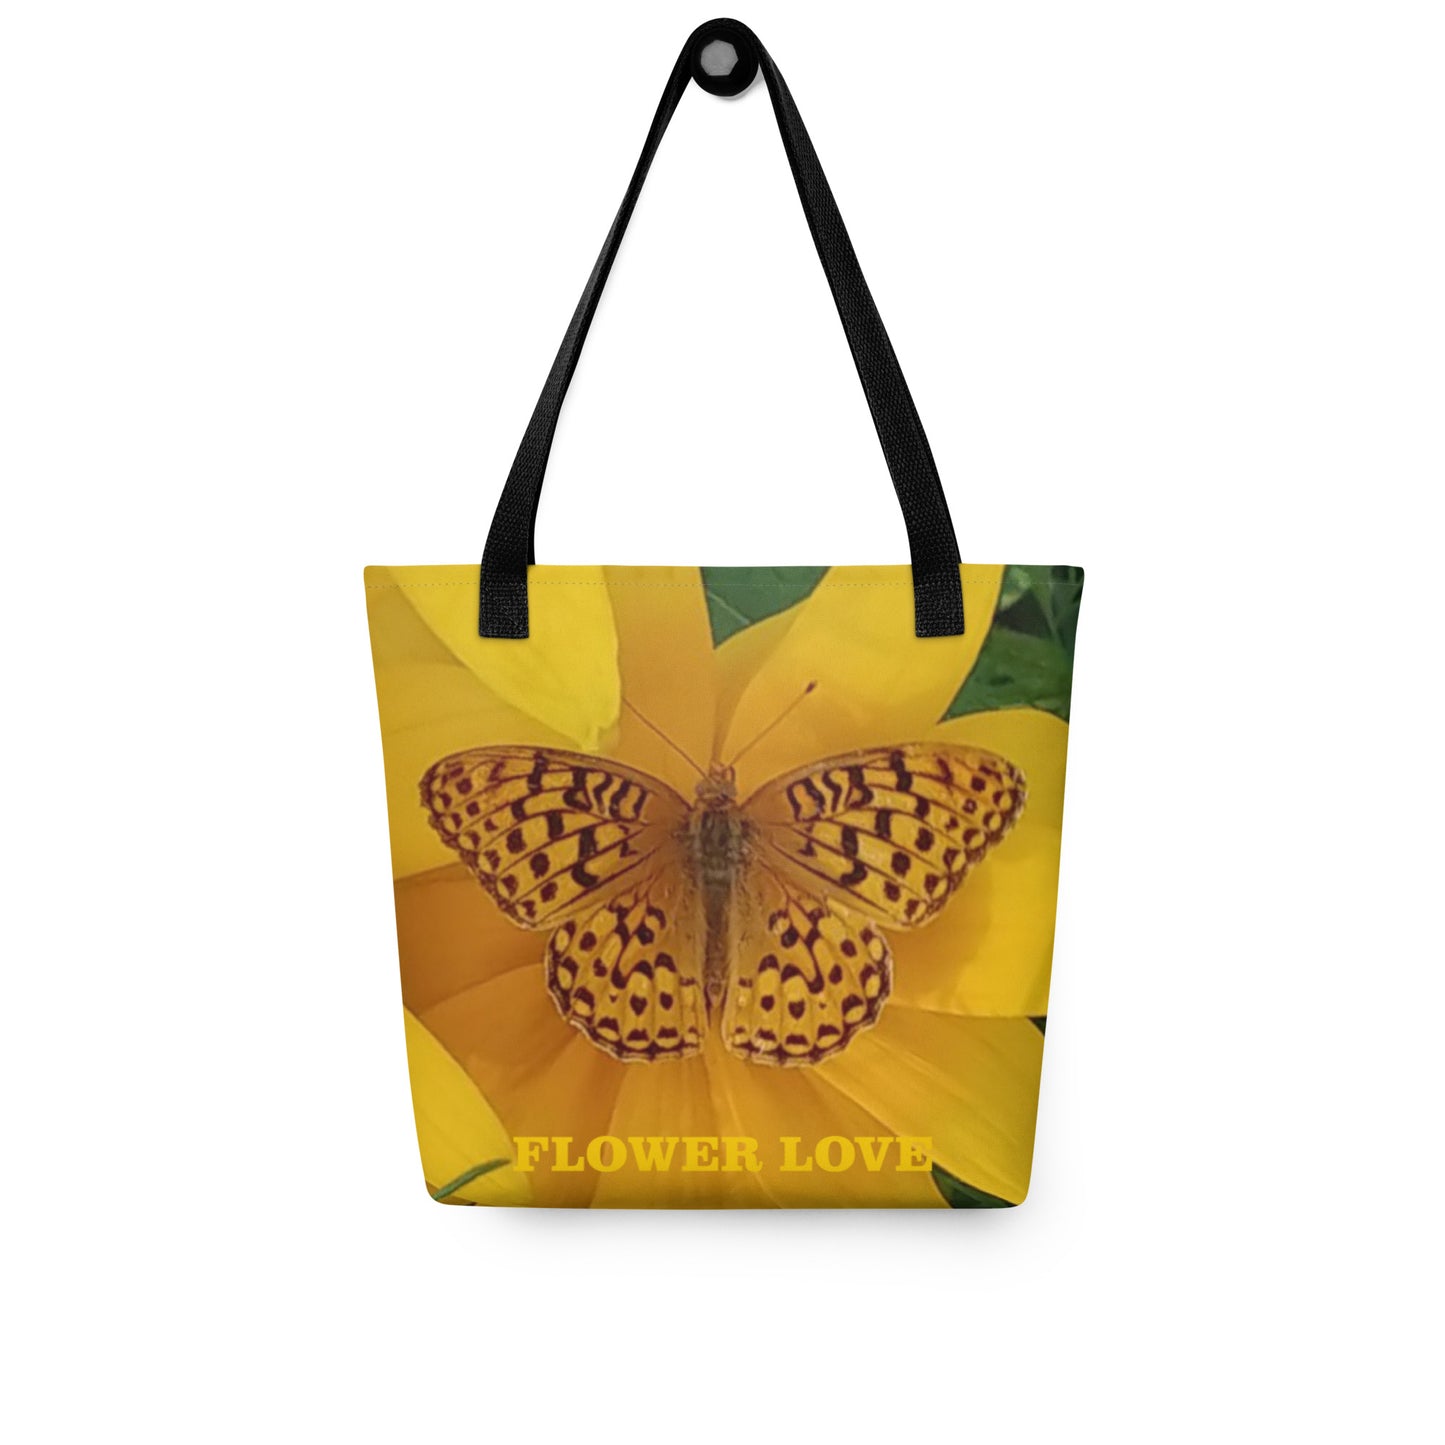 The FLOWER LOVE Collection - "Butterfly Beauty" Design Tote Bag, Beach Bag, Chemo Bag